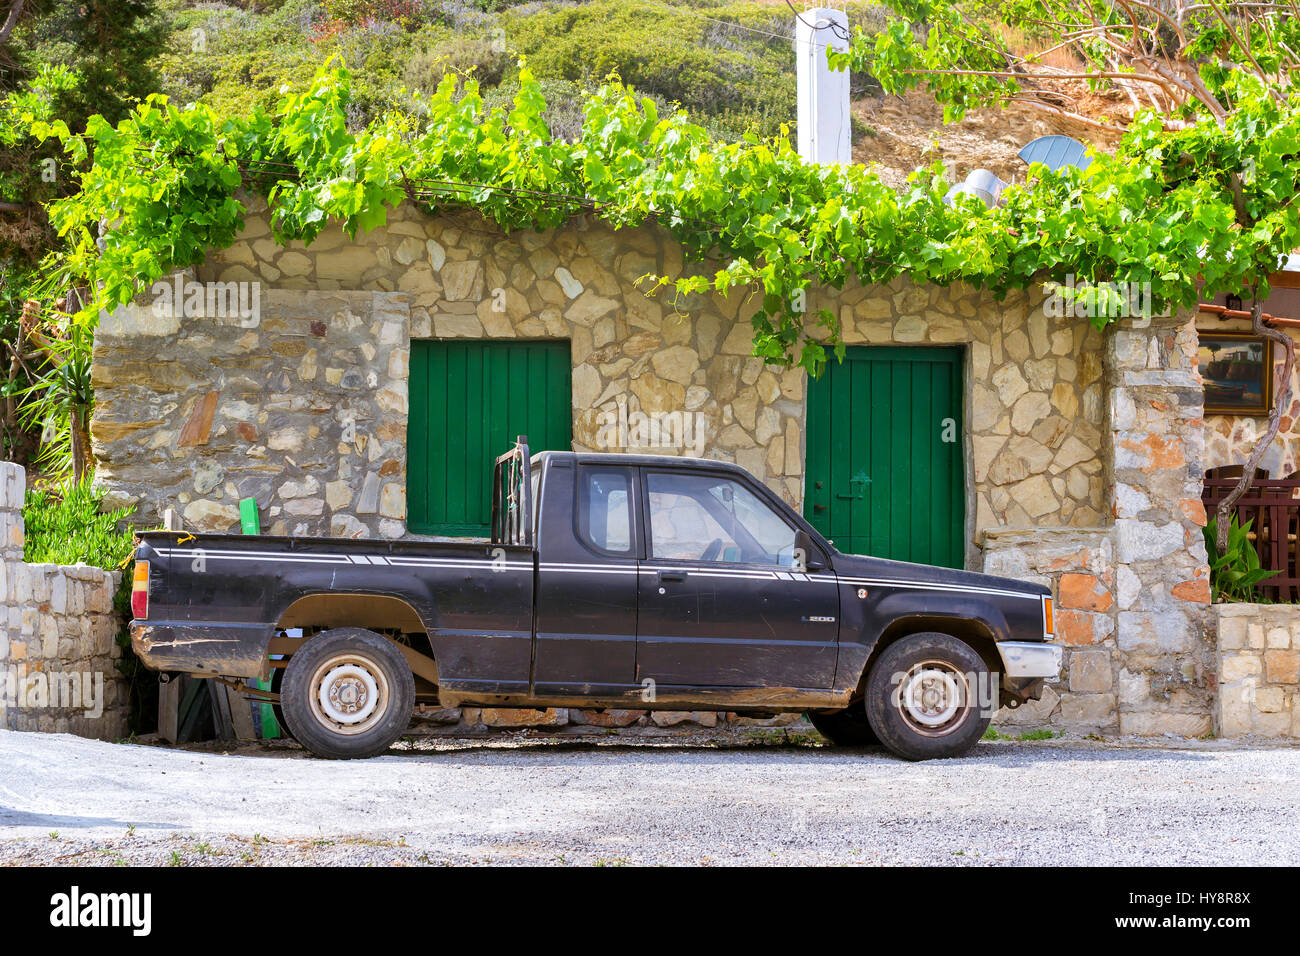 Bali, Greece - April 30, 2016: Old black pickup truck Mitsubishi L200 parked under a mountain in background of stone wall of the barn. Easy 4wd truck  Stock Photo